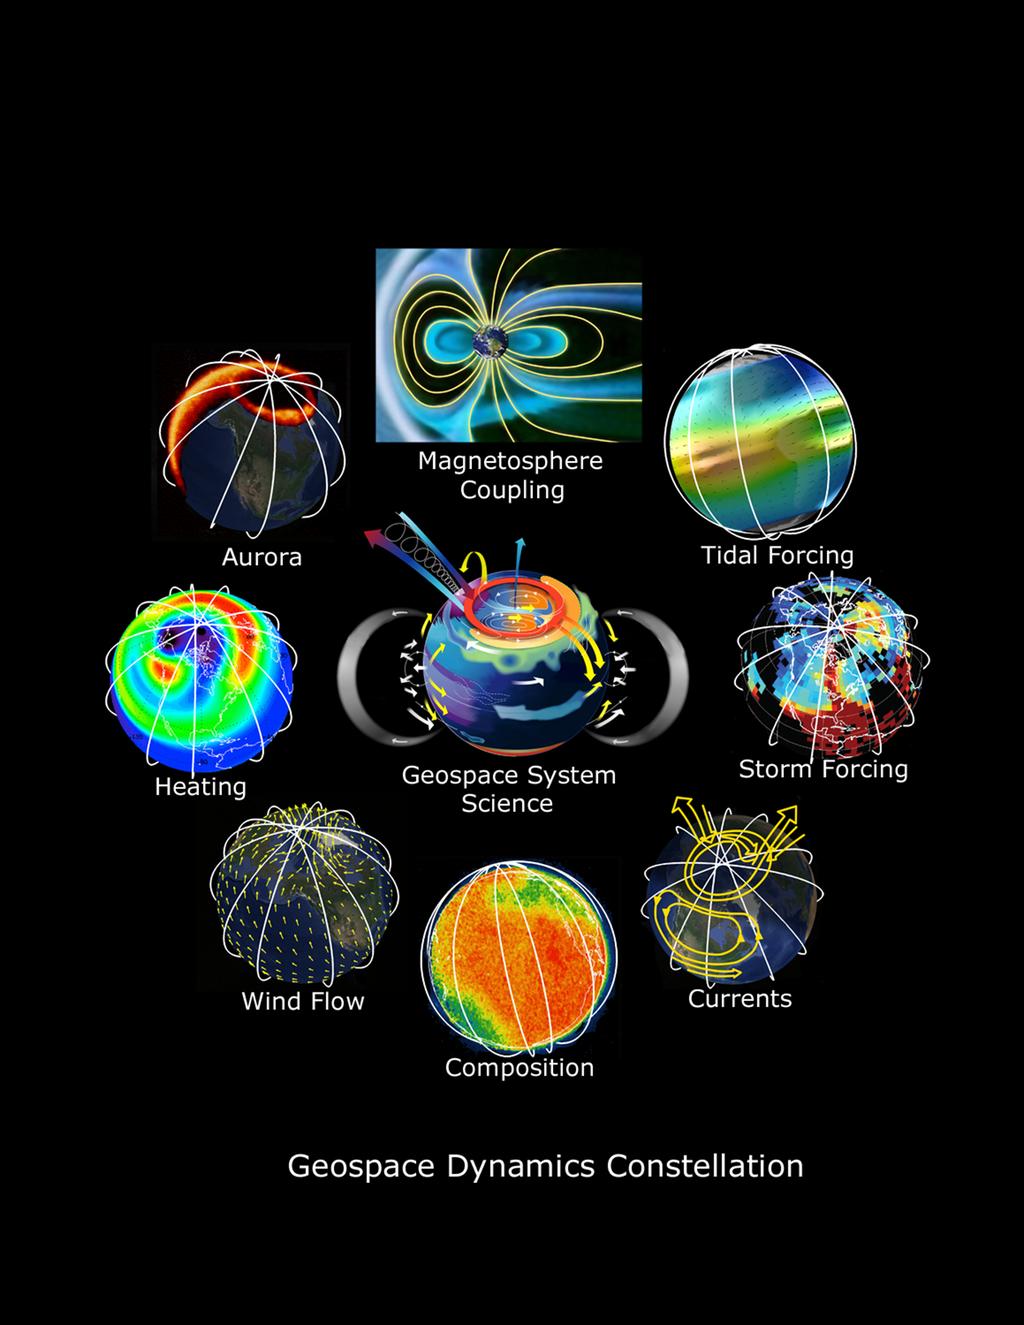 9/29/16 Decadal Strategy for Solar and Space Physics Geospace Dynamics Constellation (GDC) The primary focus of the GDC mission is to reveal how the atmosphere, ionosphere and magnetosphere are